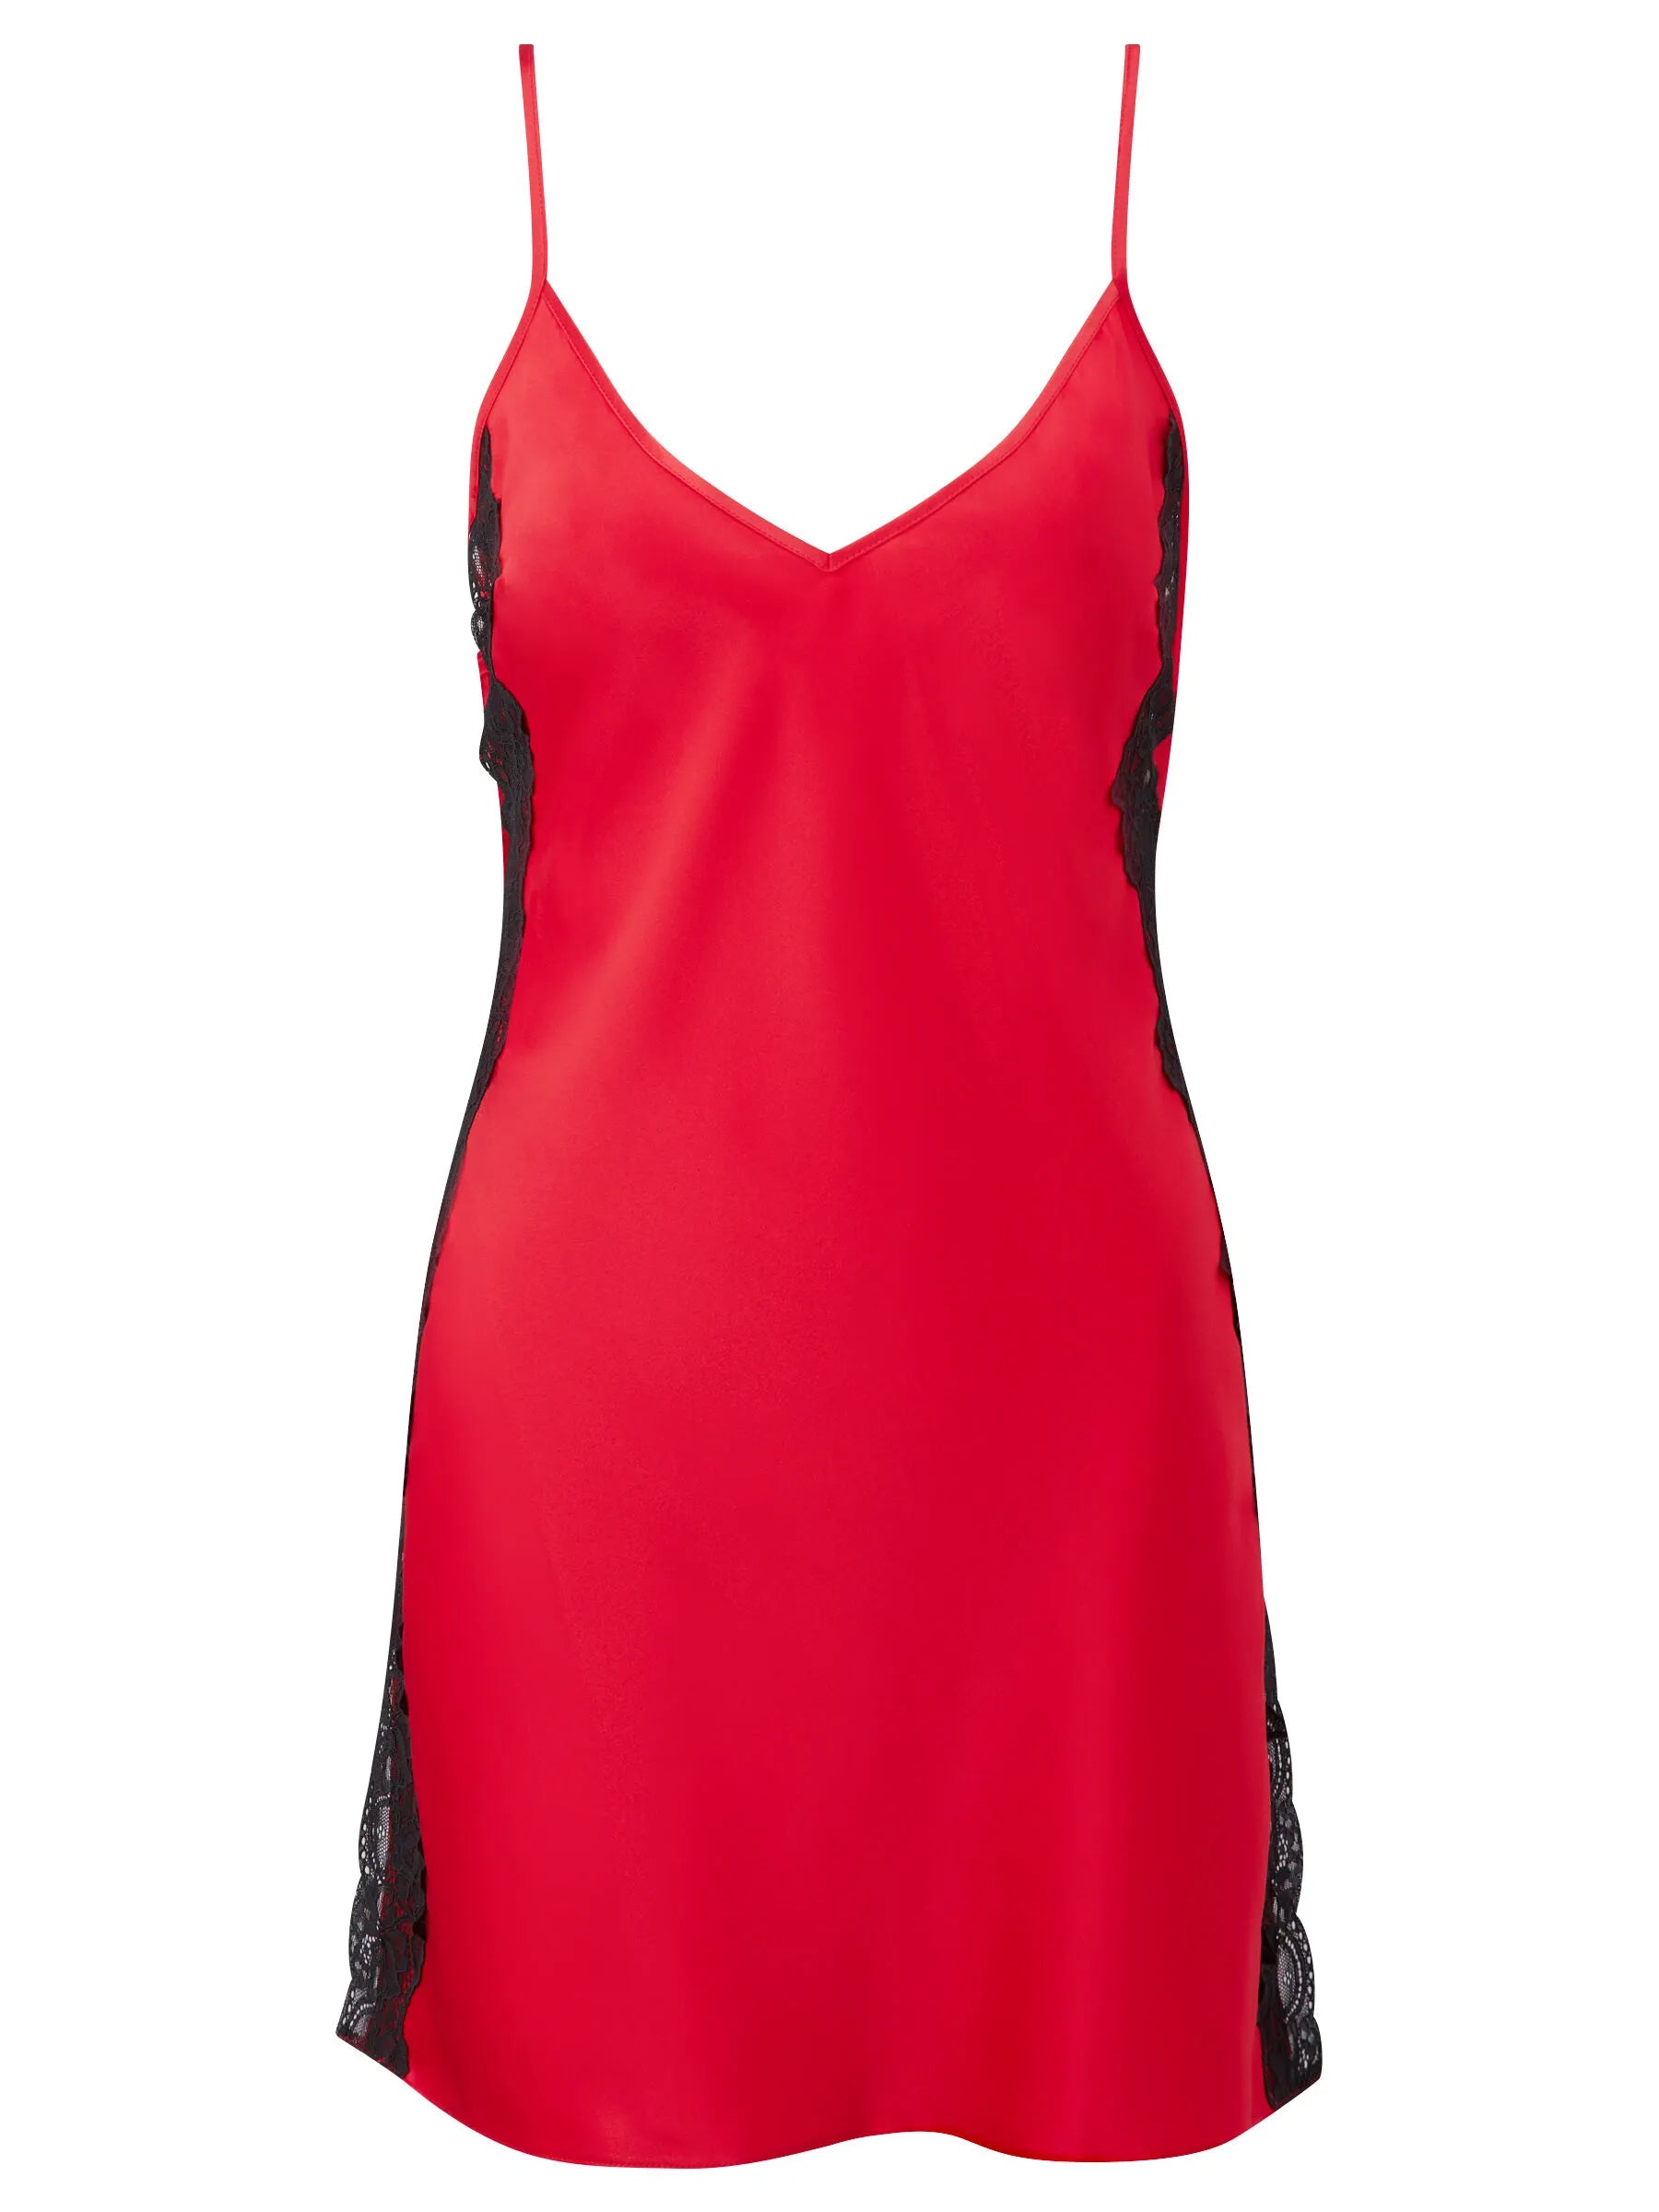 Rosalie Chemise Red From Ann Summers, Image 03